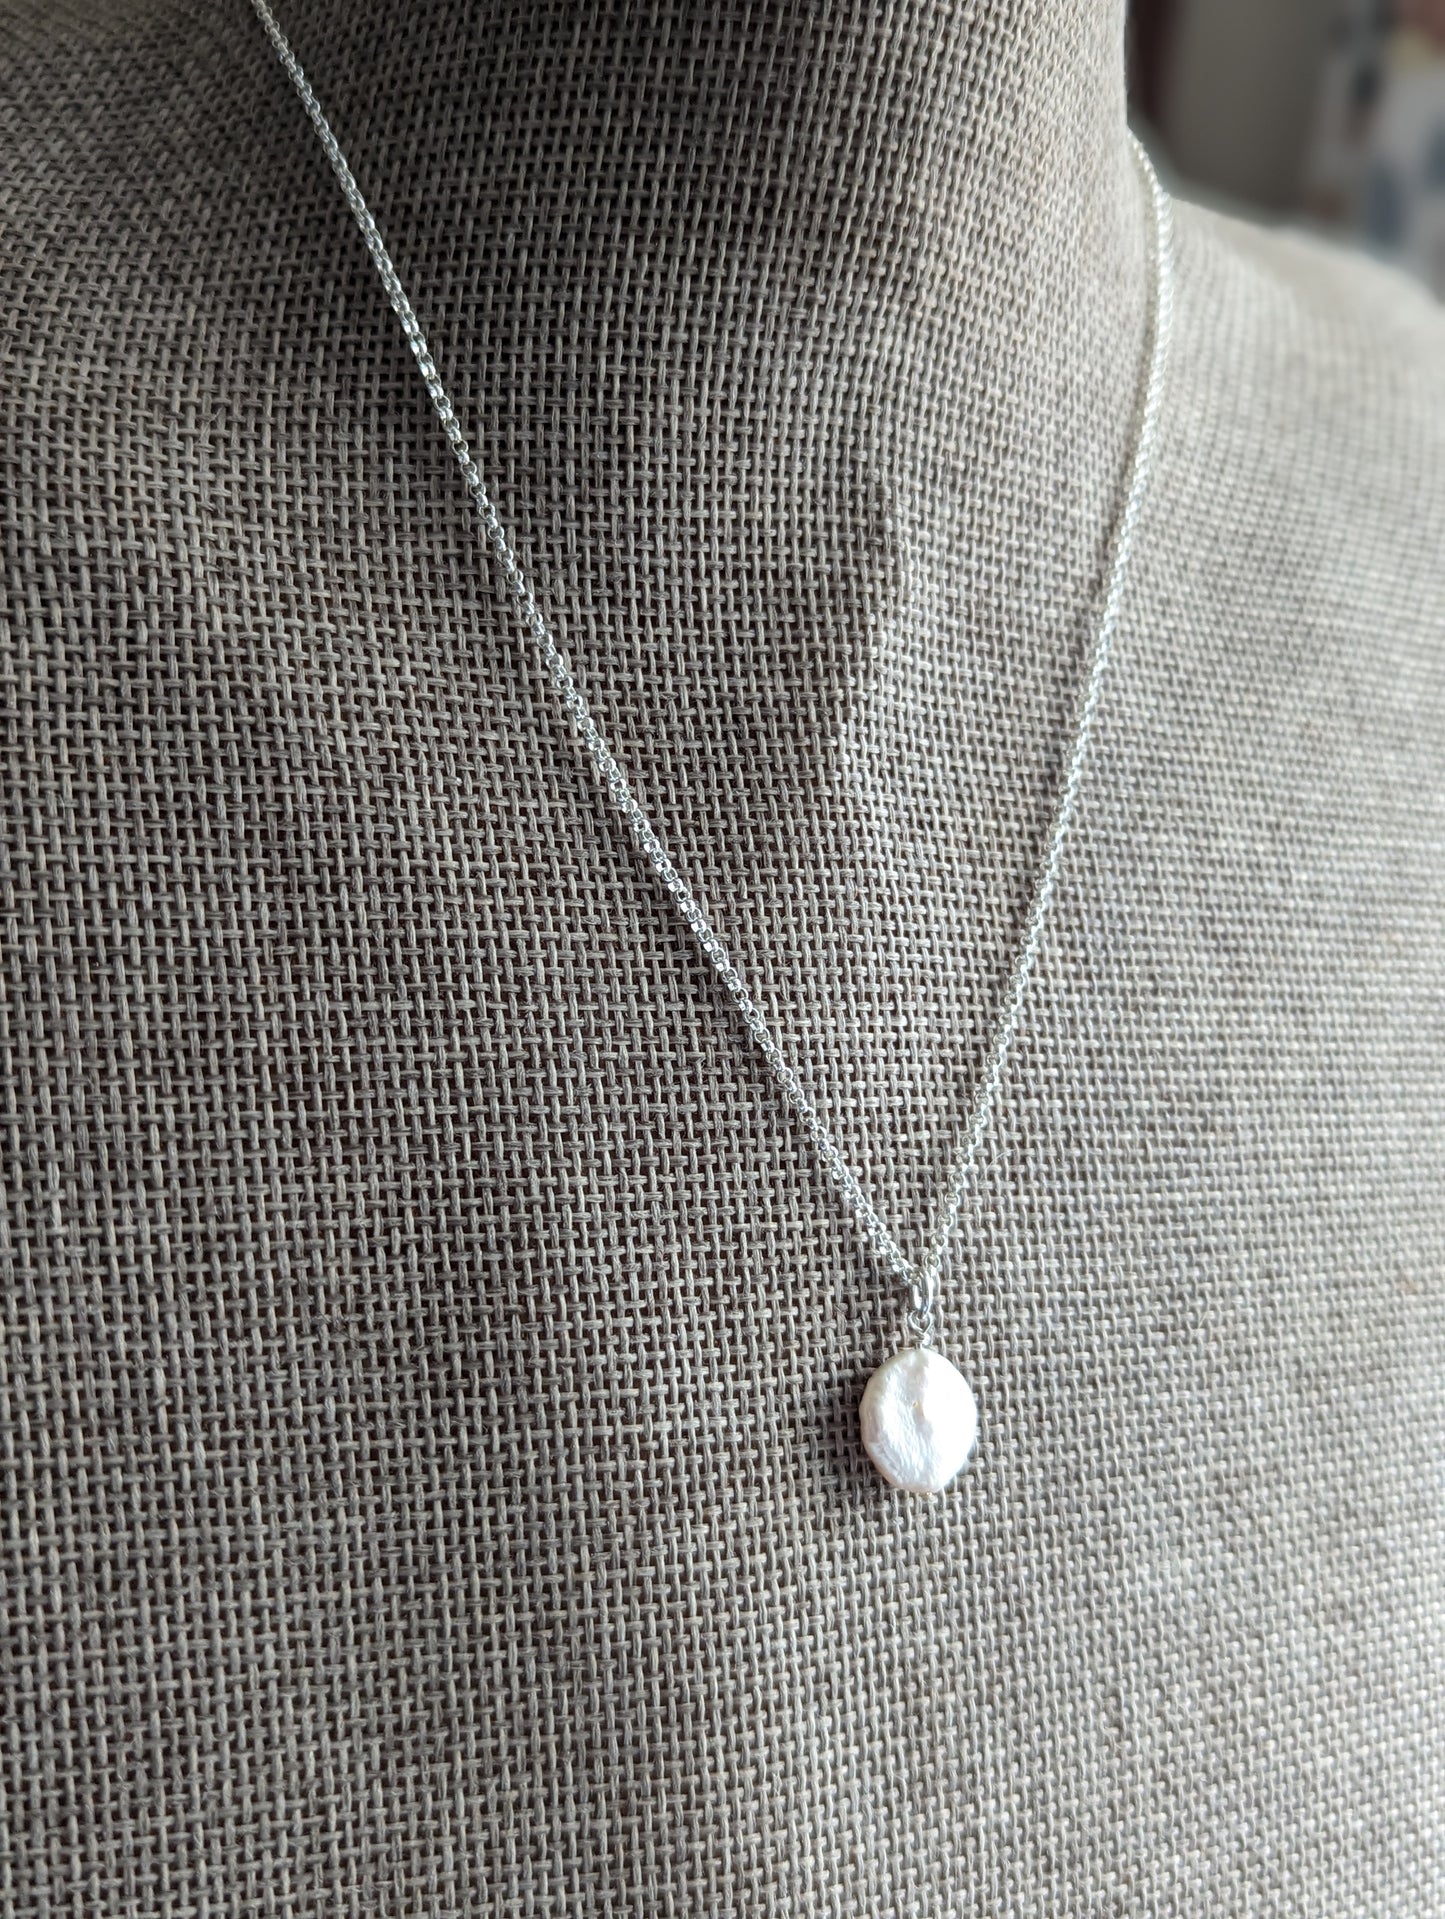 Freshwater Pearl Pendant on Sterling silver